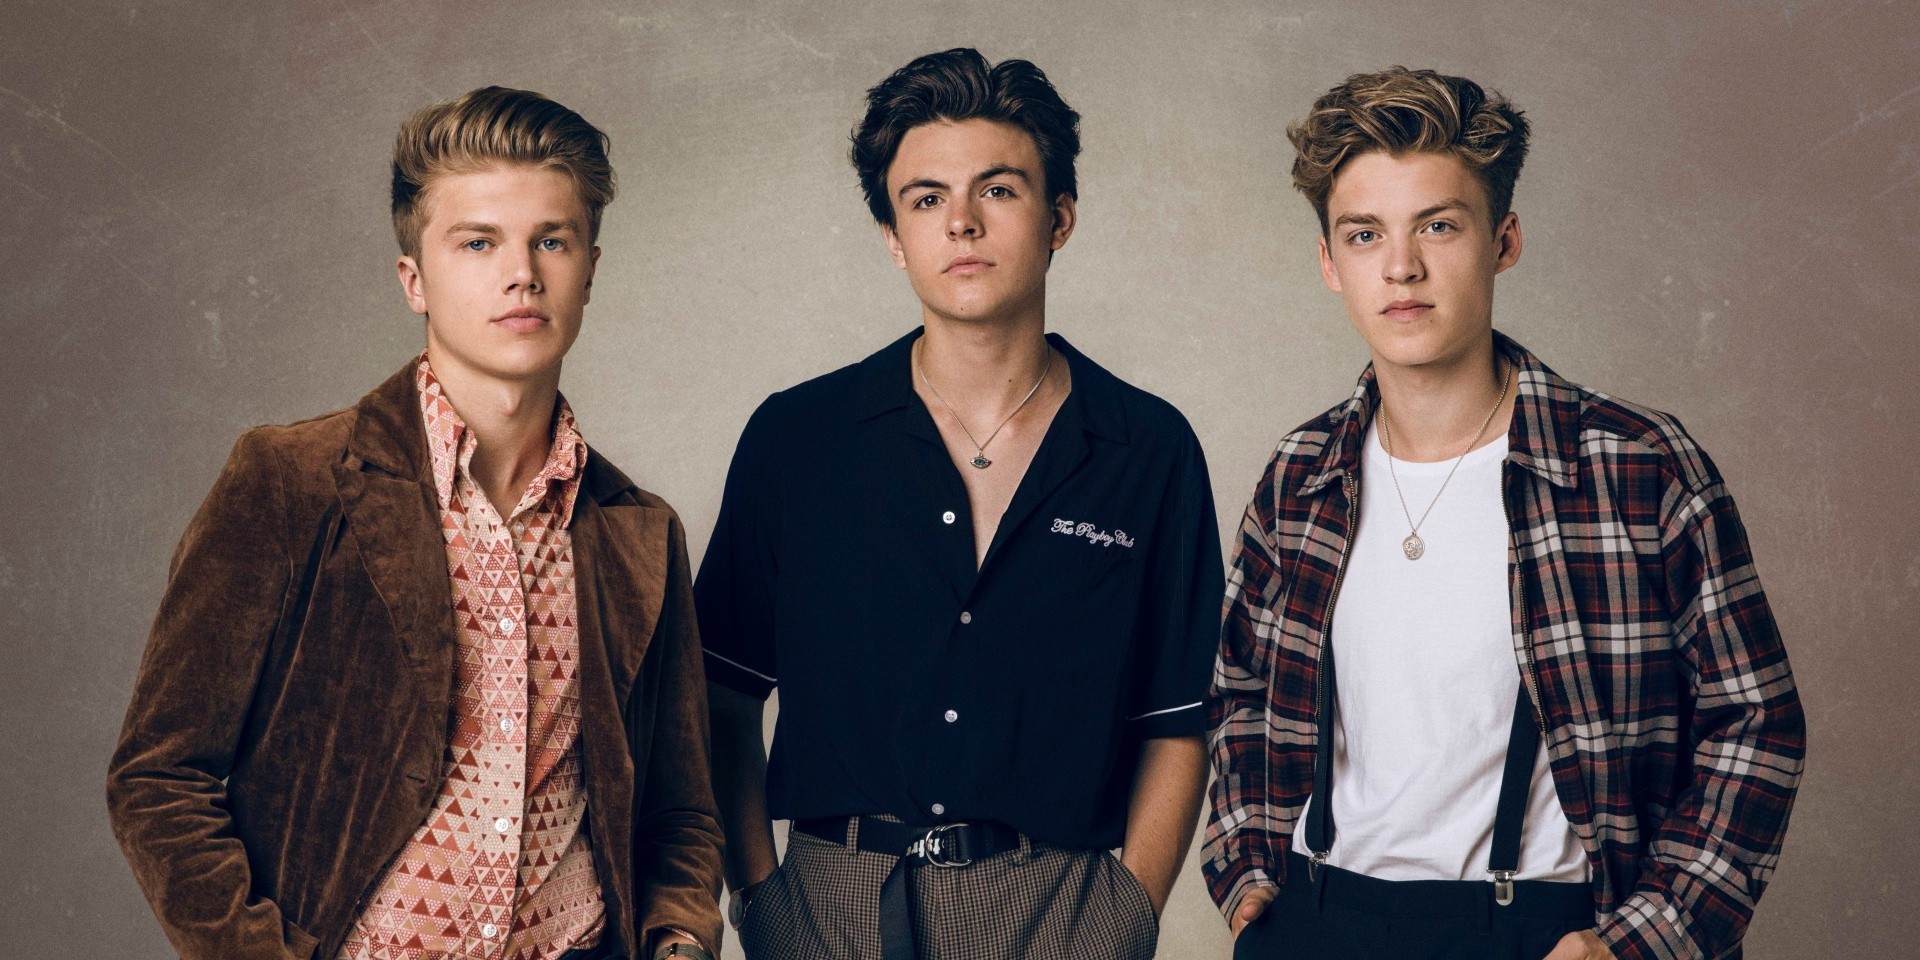 "It's nice to look back on where we came from to where we are at now": An interview with New Hope Club